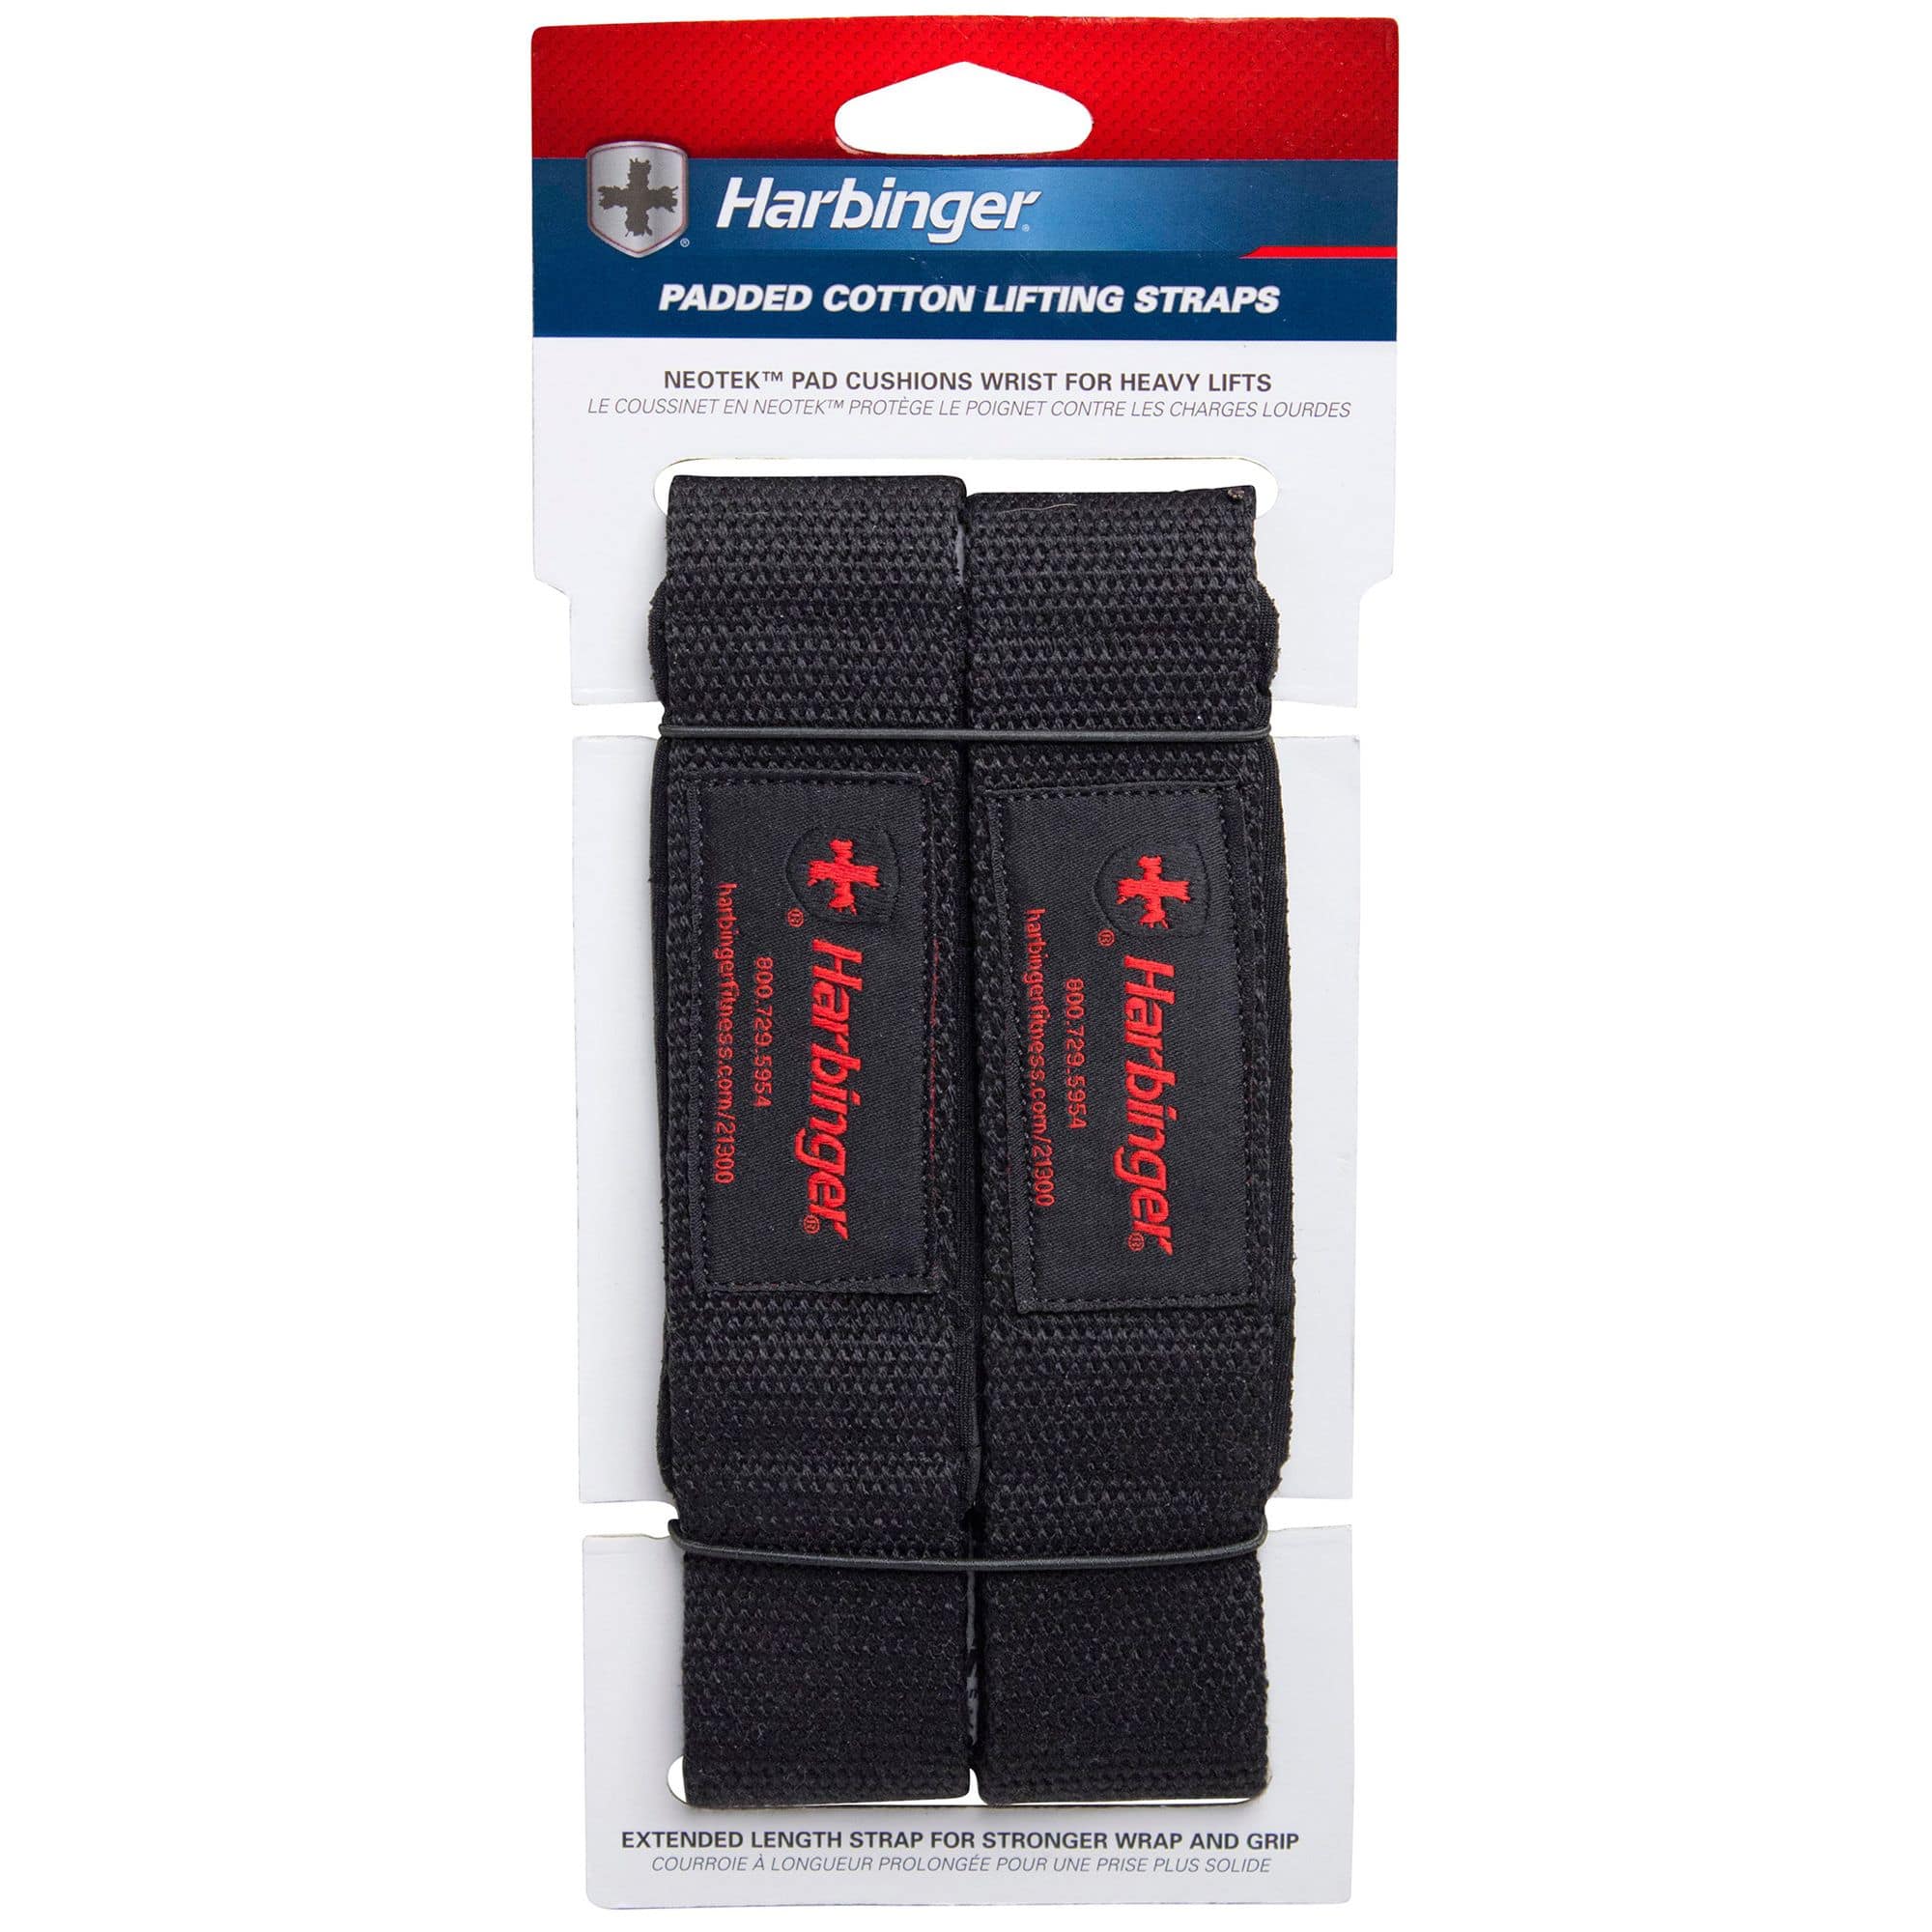 https://media-www.canadiantire.ca/product/playing/exercise/exercise-accessories/0847187/harbinger-21-padded-cotton-lifting-straps-b50ad94c-ff40-4882-a444-7fde4603782f-jpgrendition.jpg